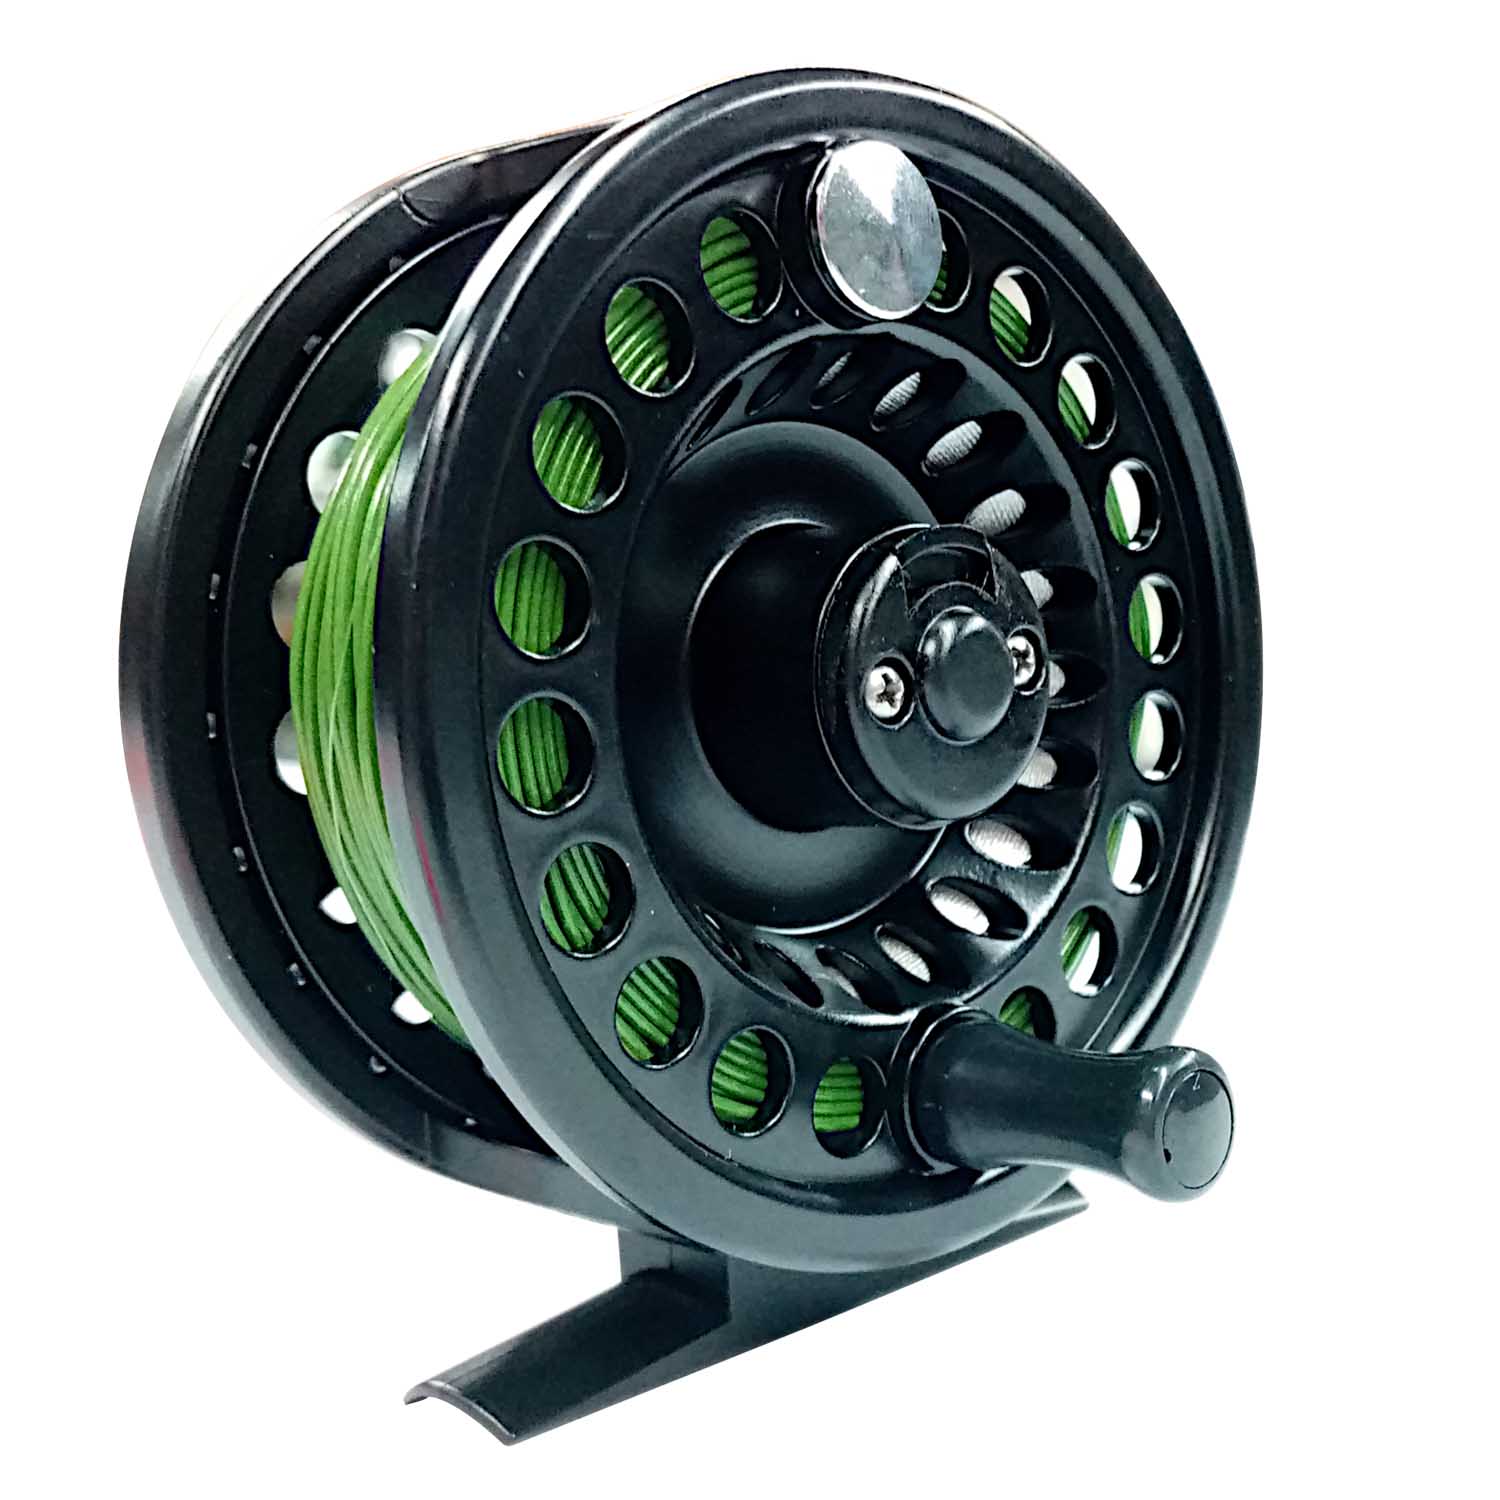 Kingfisher Mayfly Trout Fishing Reel 560 & WF6 Olive Intermediate Fly Line  - Showspace